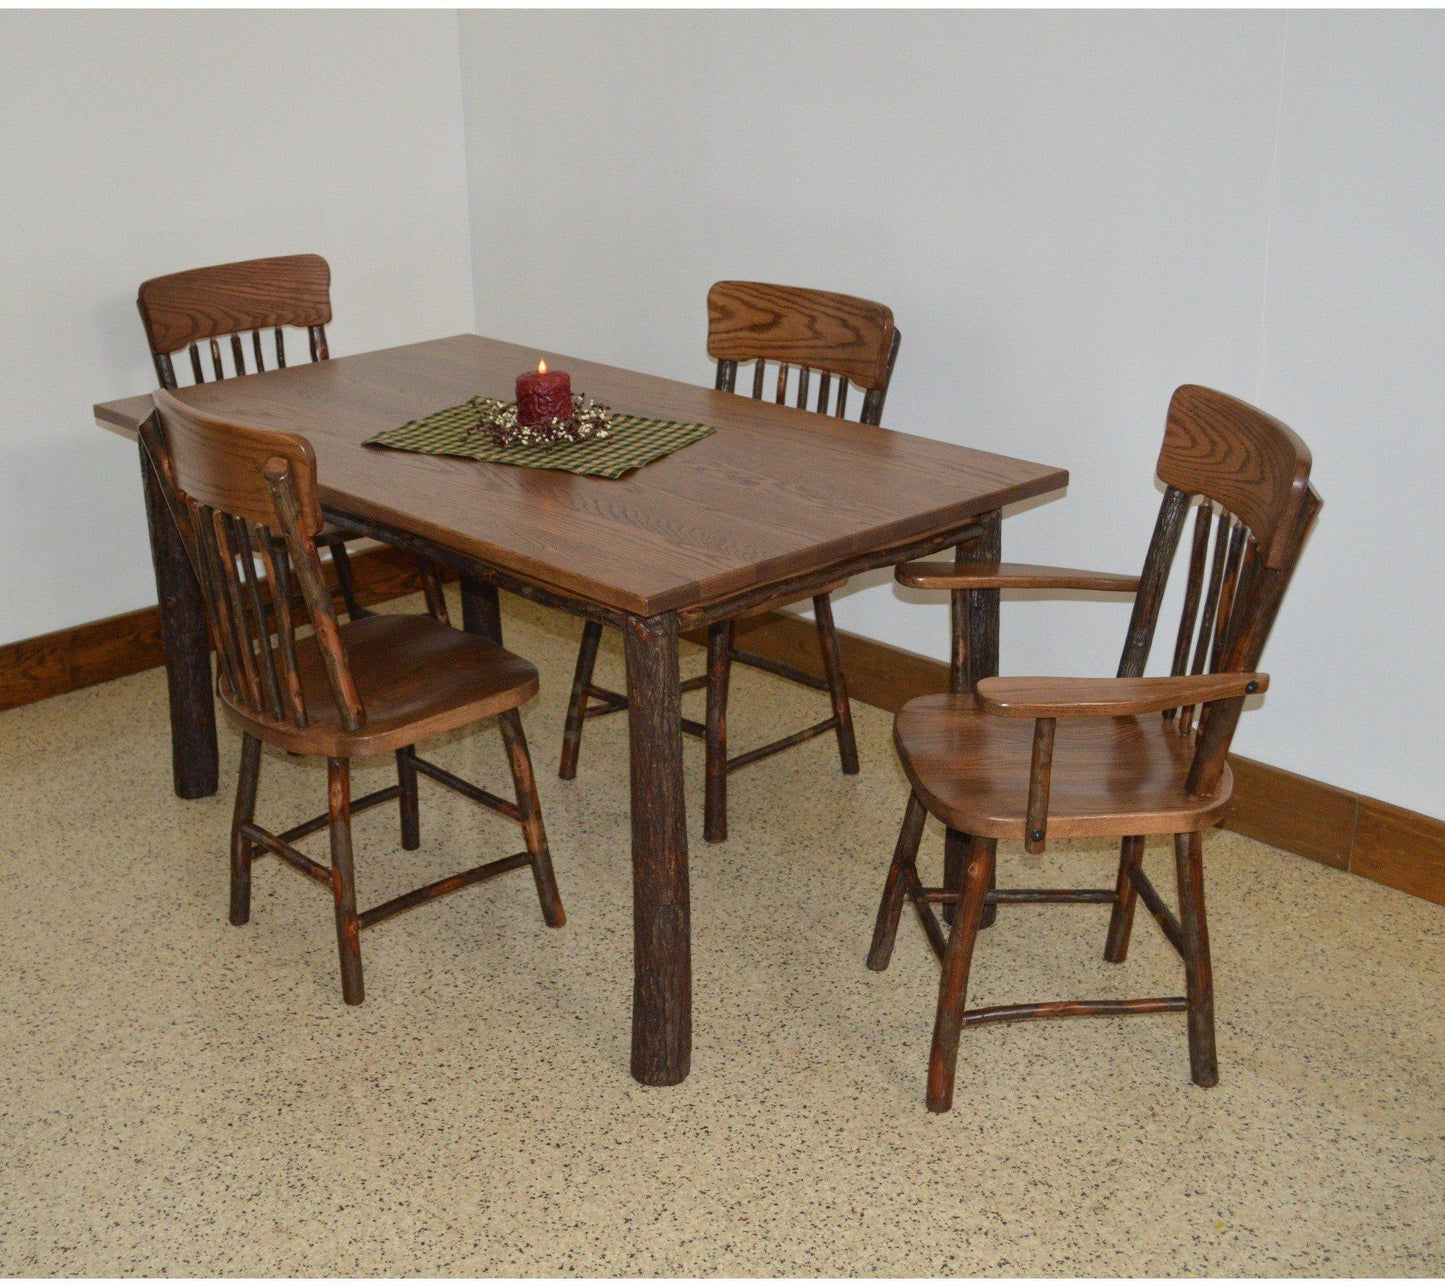 A & L Furniture Co. Hickory 5 Piece Farm Table Dining Set  - Ships FREE in 5-7 Business days - Rocking Furniture